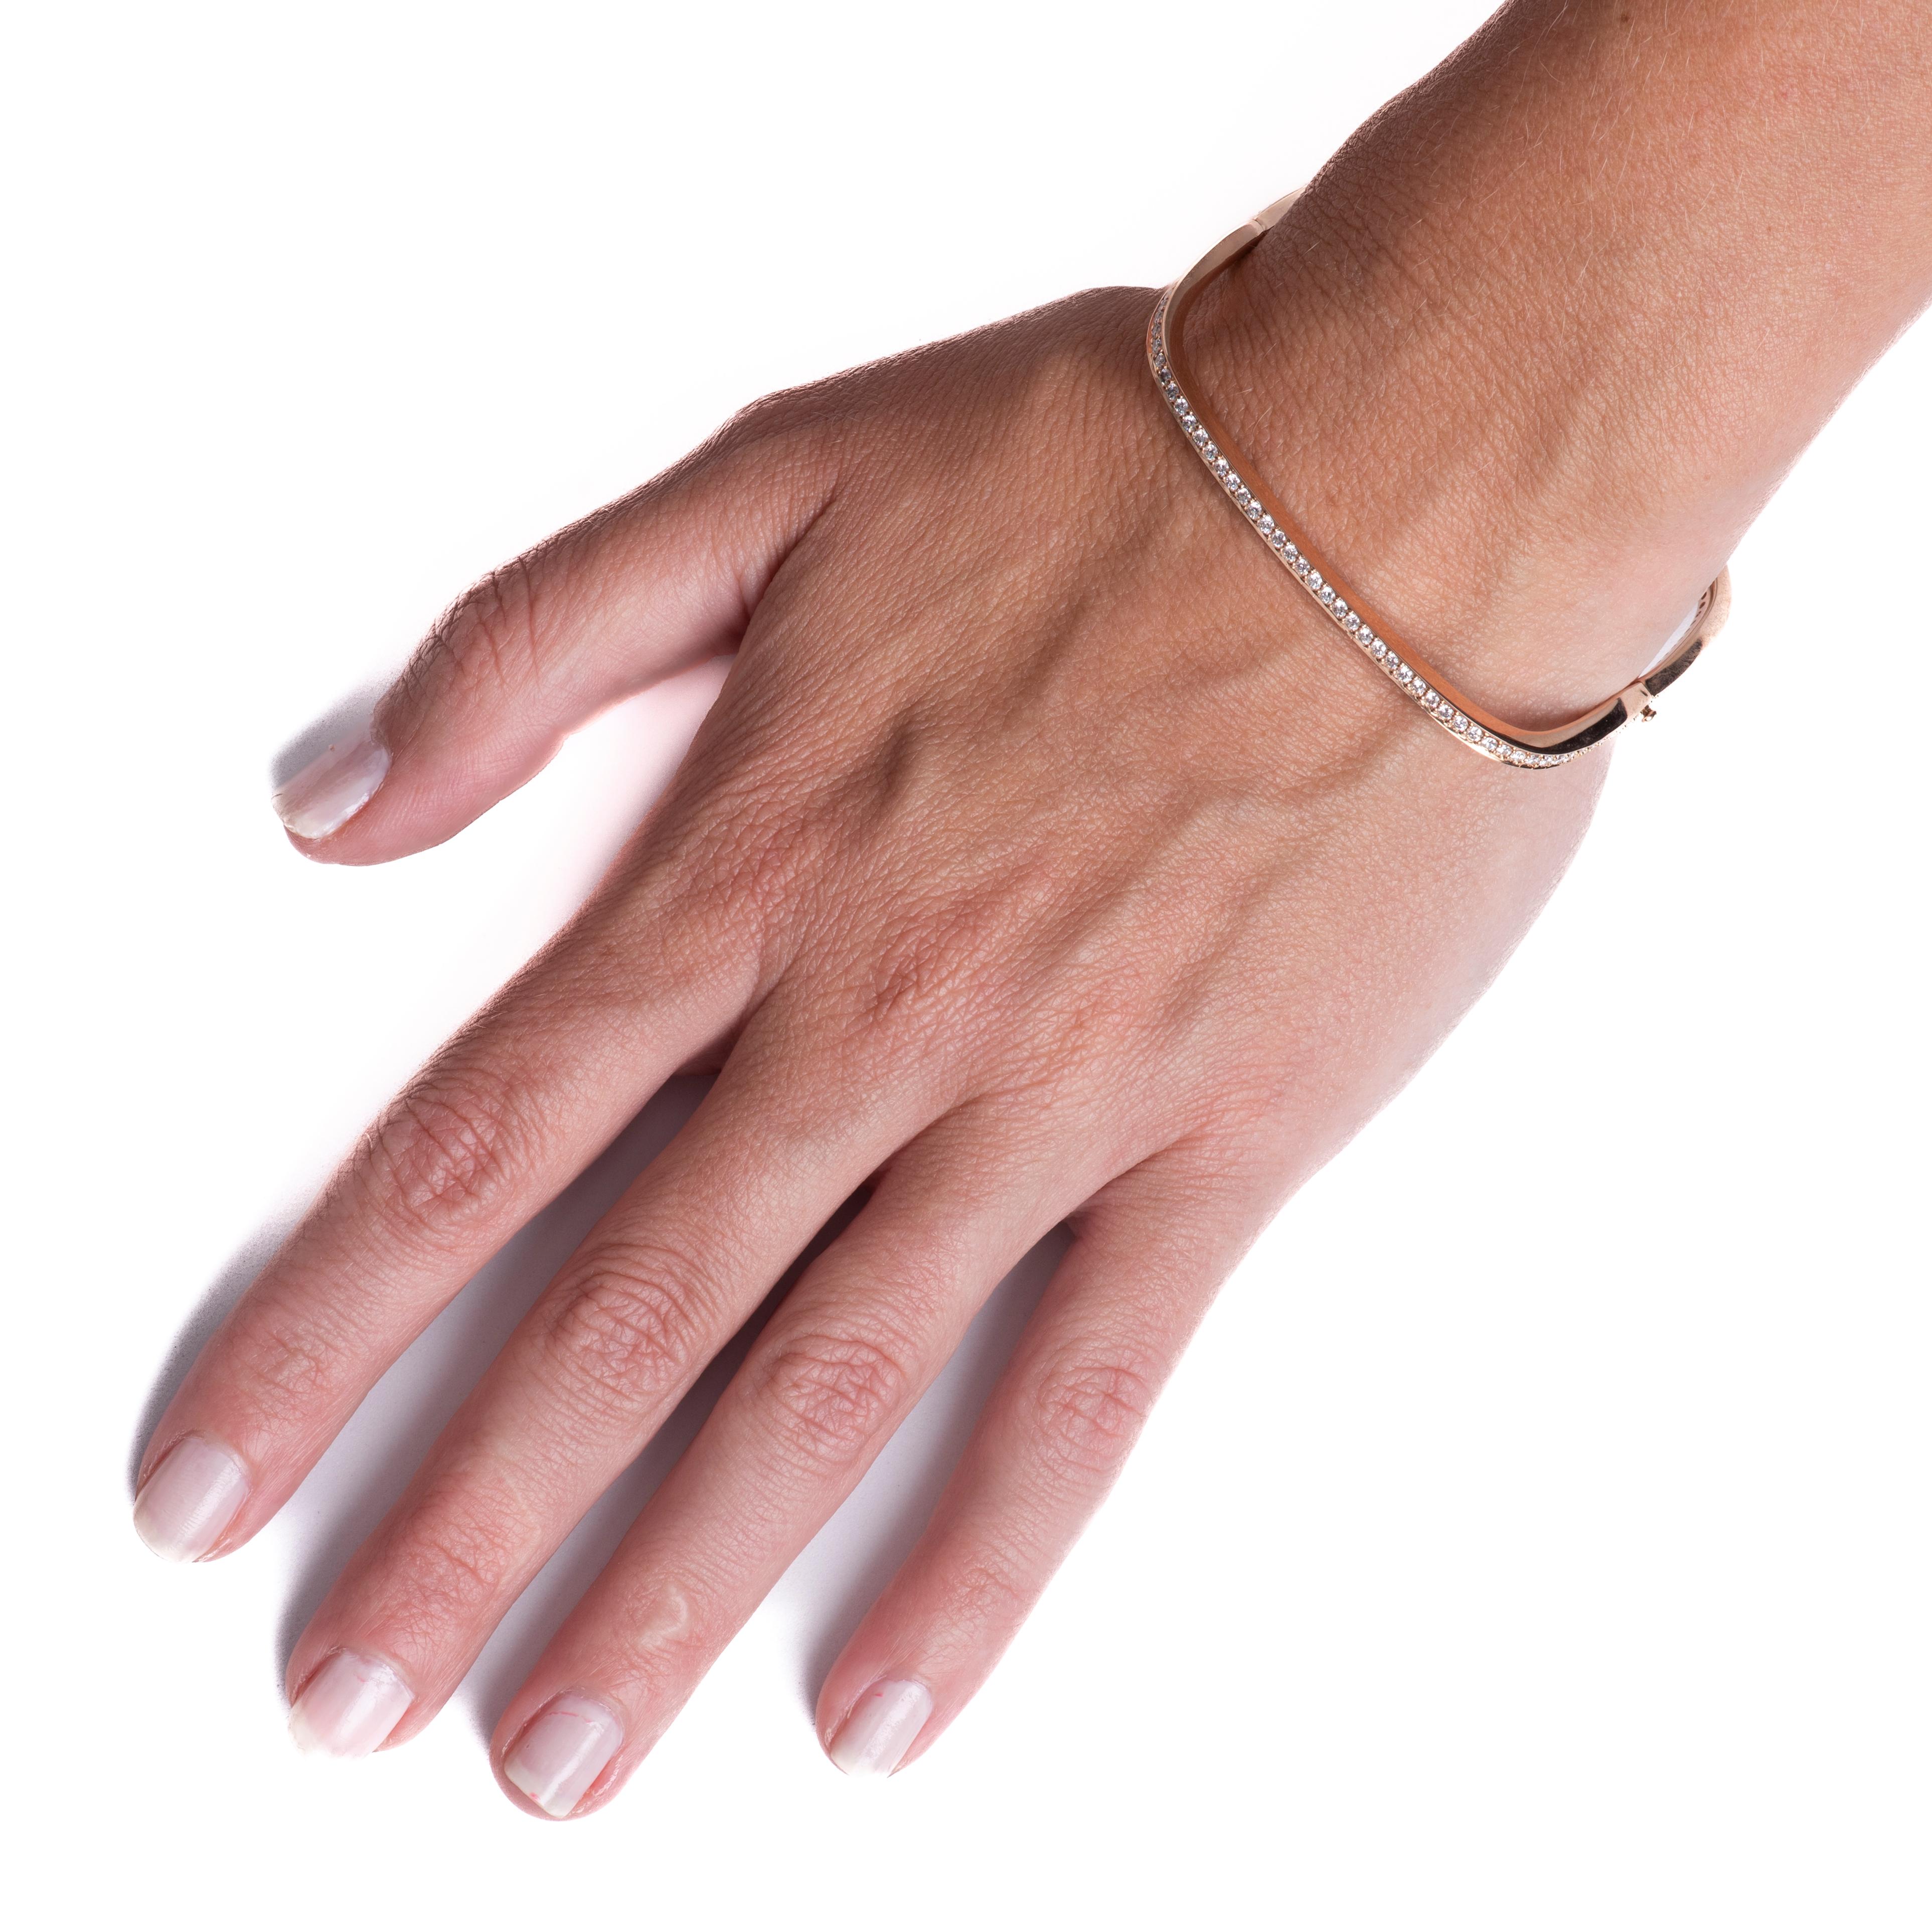 This square shaped bangle features 2.10 carat total weight in round brilliant cut natural diamonds set in 18 karat rose gold. Wear alone or layer with your other favorite bracelets for a unique look. 
Measurements: Outer circumference approximately